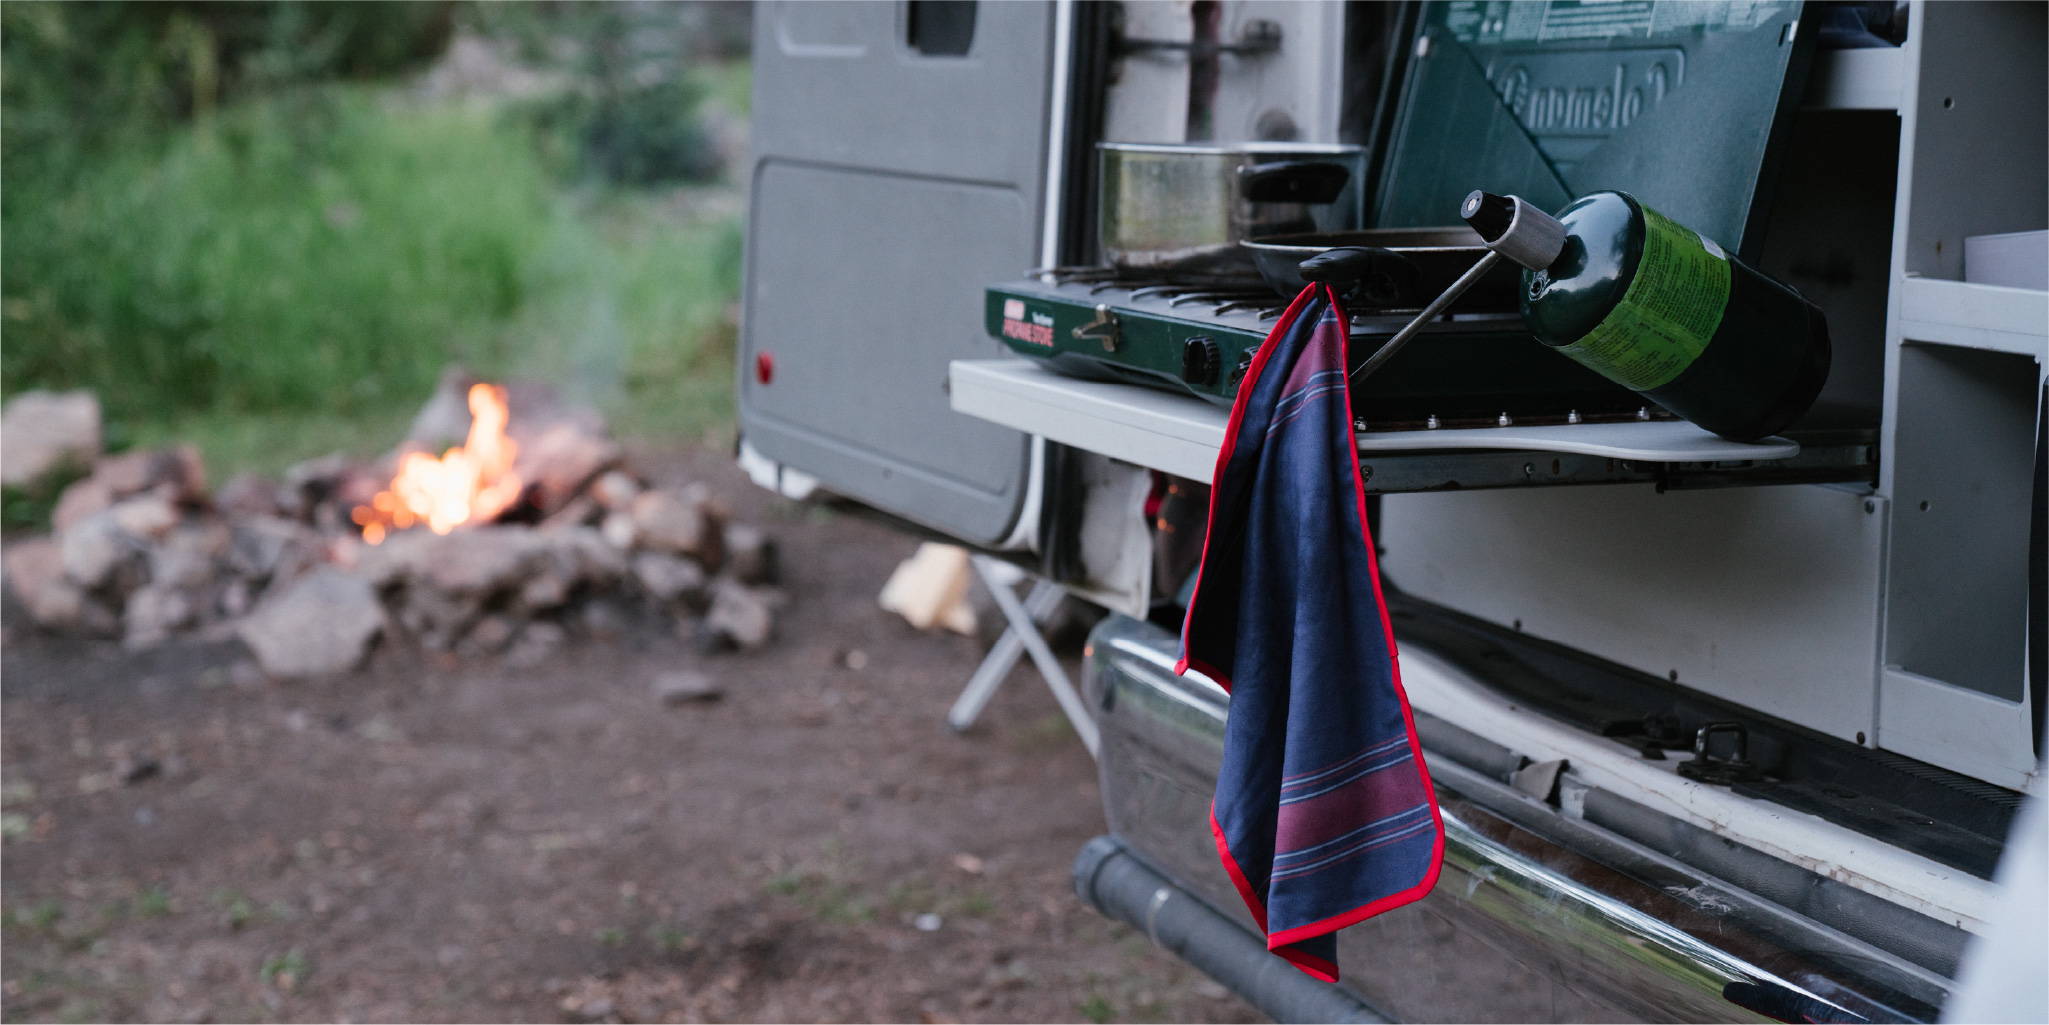 Shammy towel hanging off portable stovetop on truck